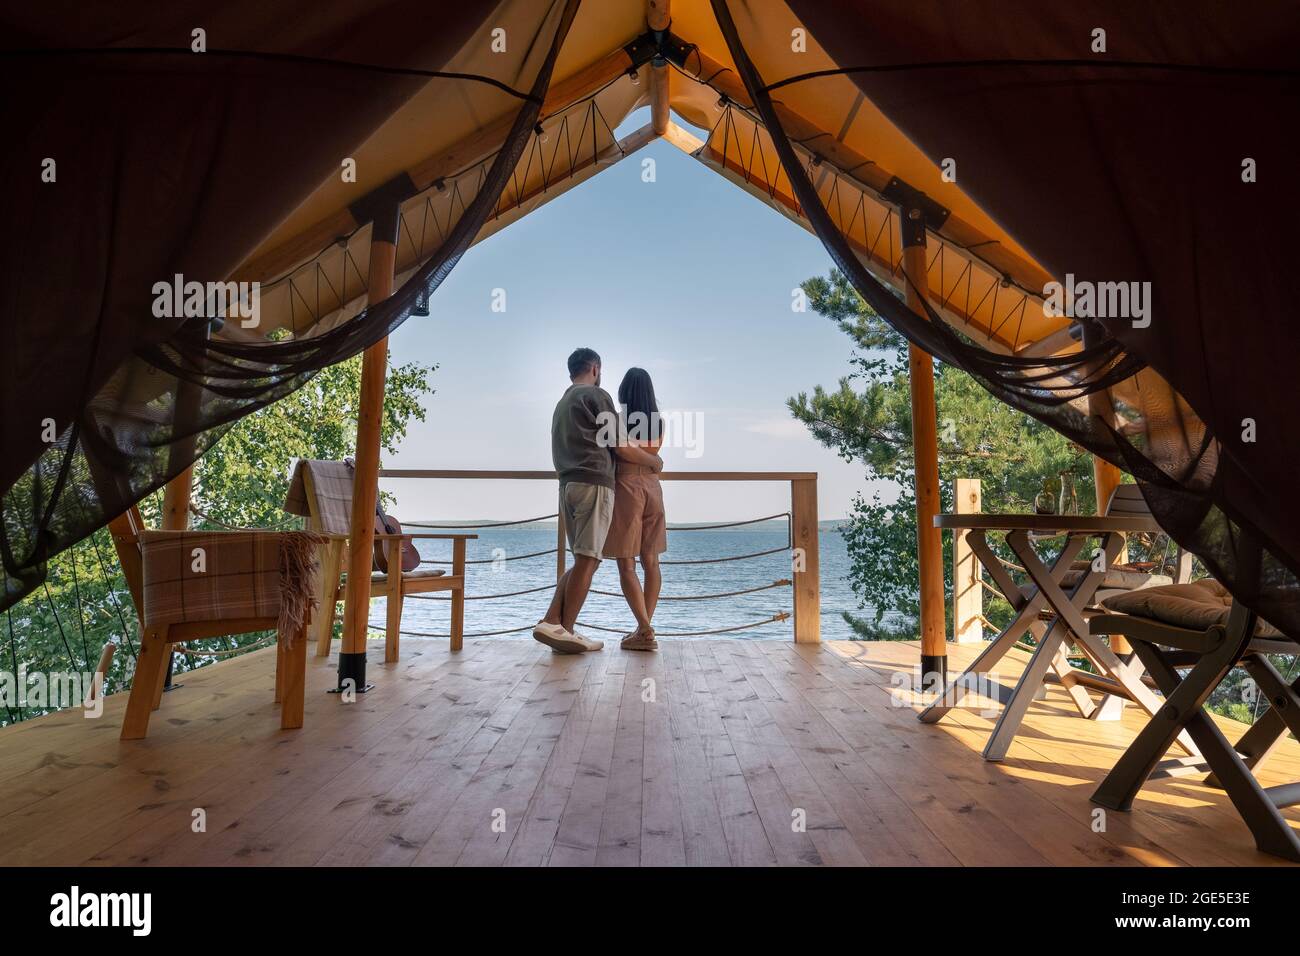 Rear view of amorous couple standing close to each other and looking at blue ocean while enjoying summer vacation Stock Photo